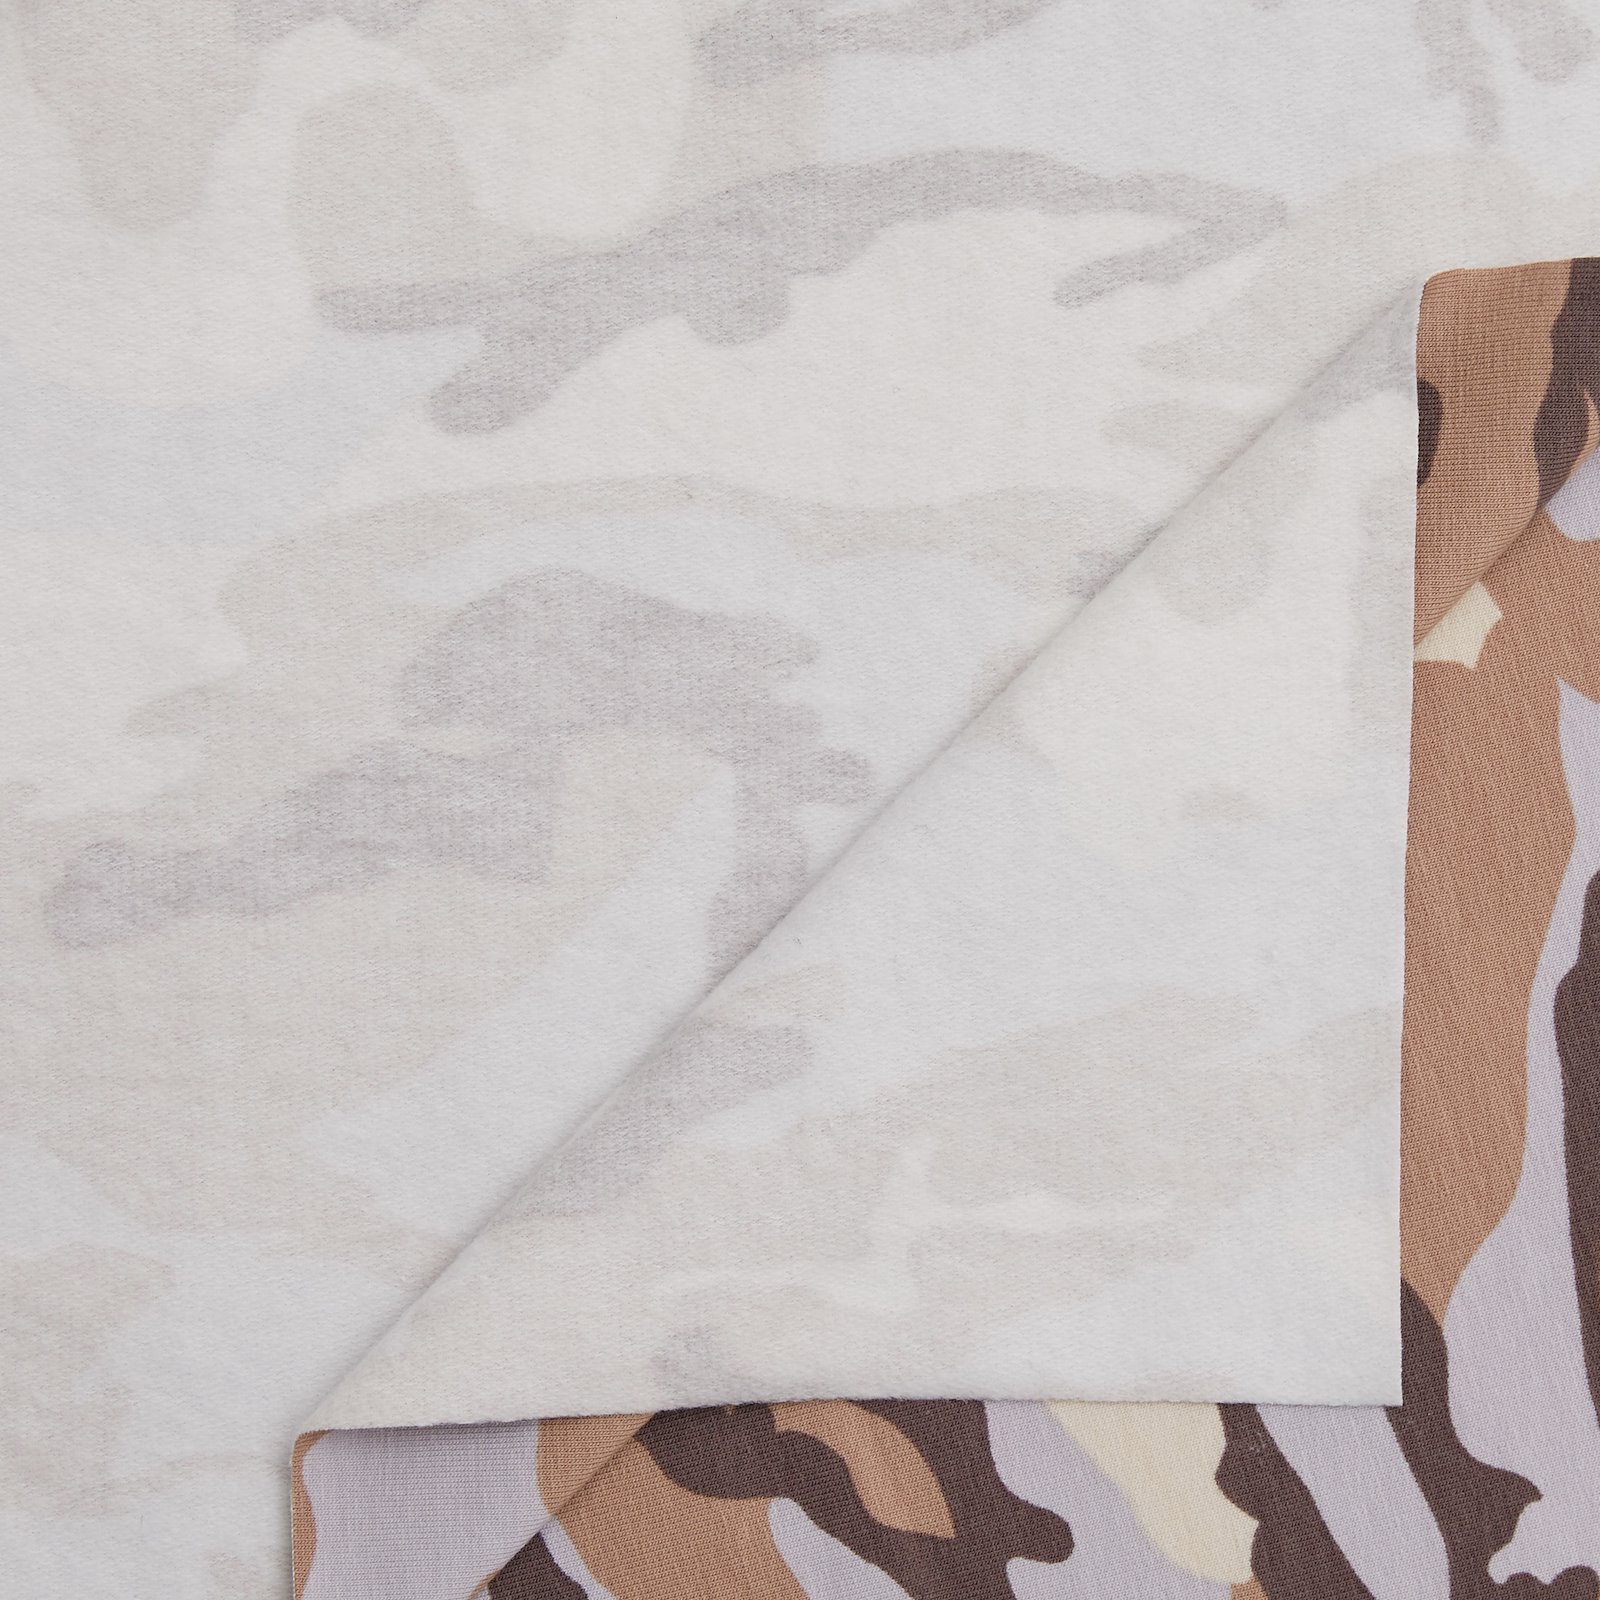 Sweat lavendel m camouflage print ang. 211932_pack_b